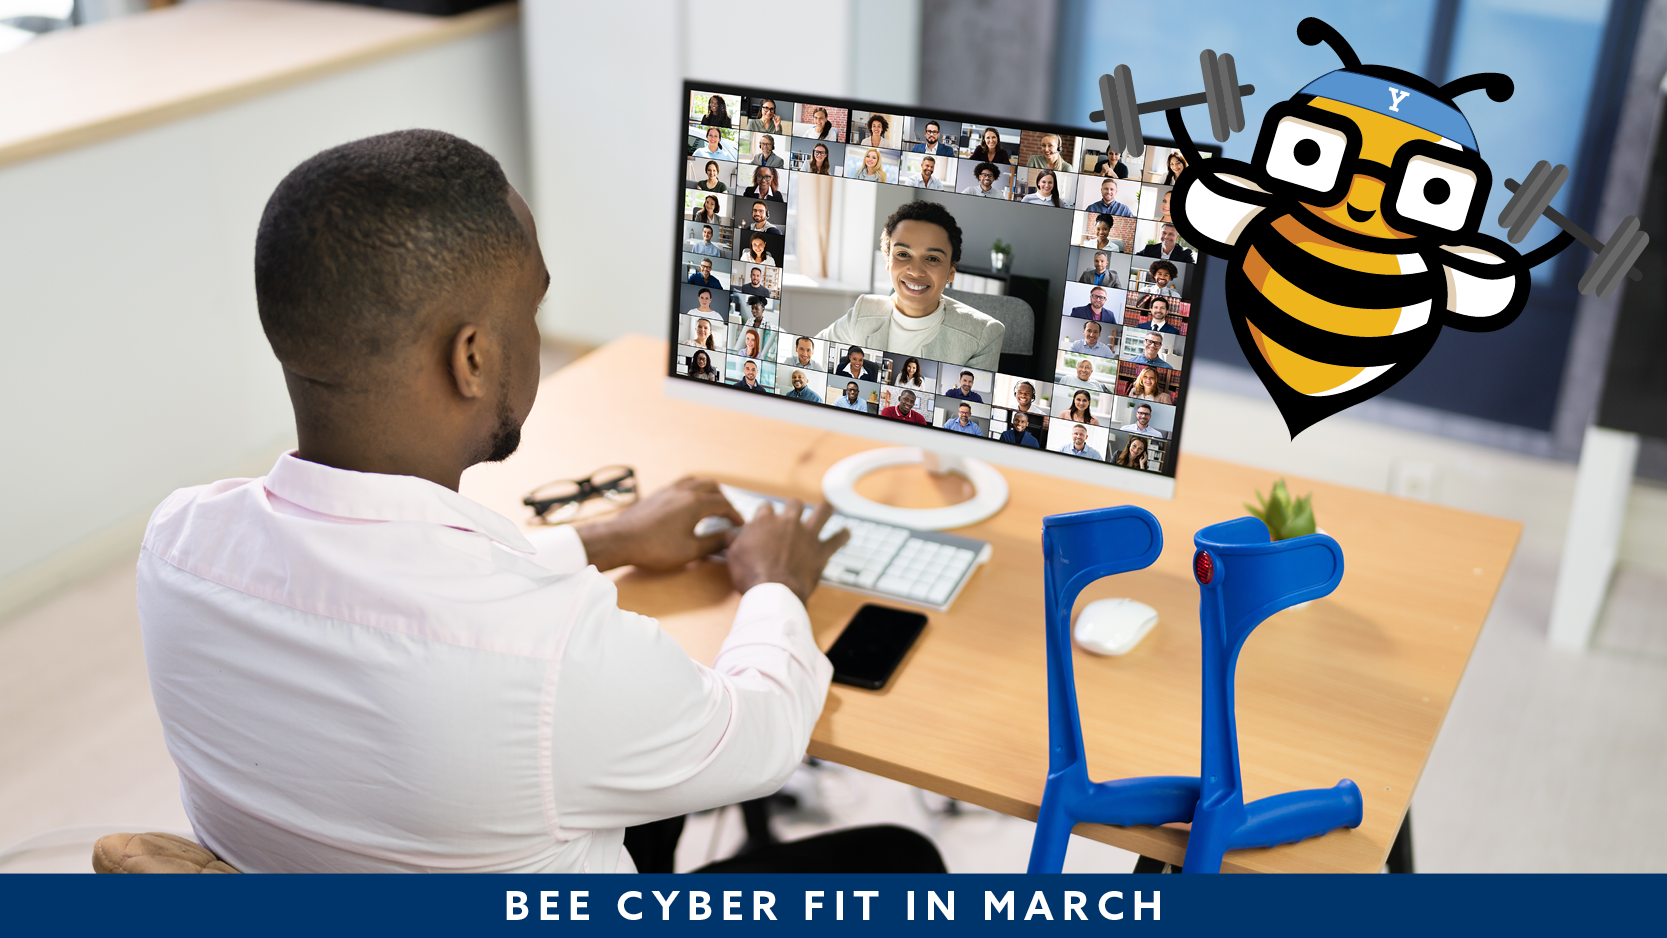 Bee Cyber Fit in March hero: Man in a virtual meeting on laptop with Bee Cyber Fit bee logo